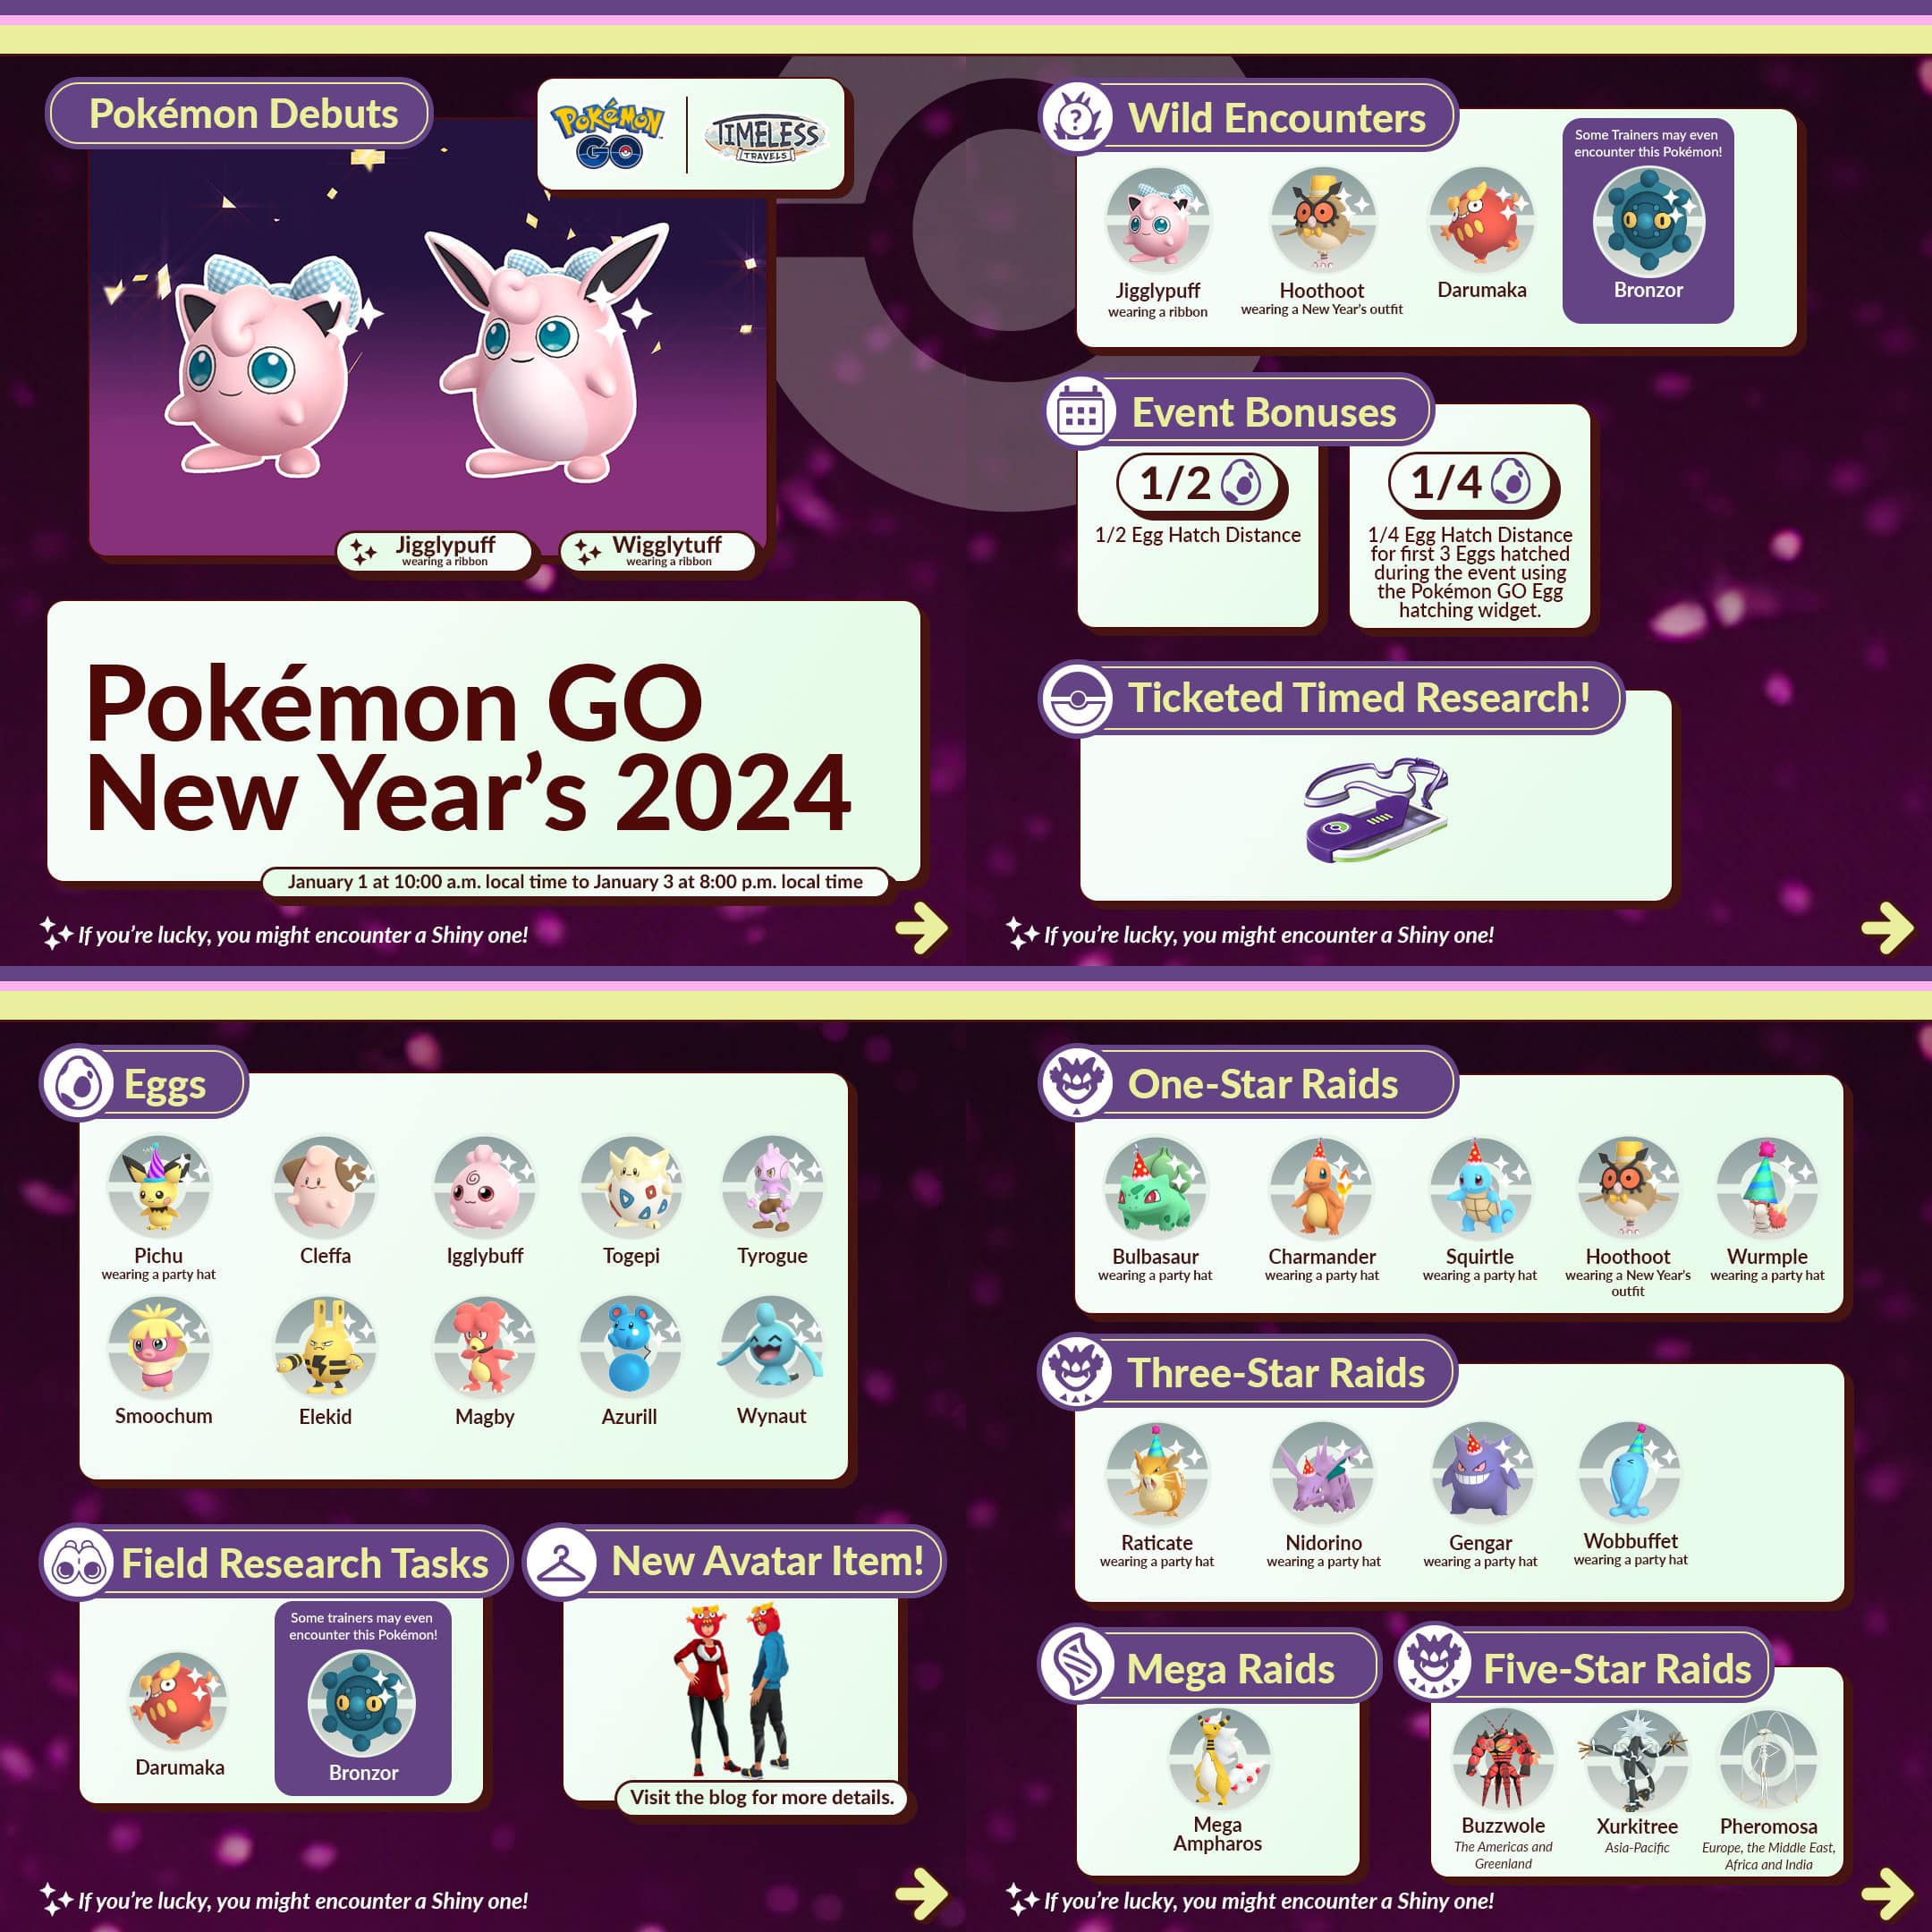 How many Pokémon are there in 2024?